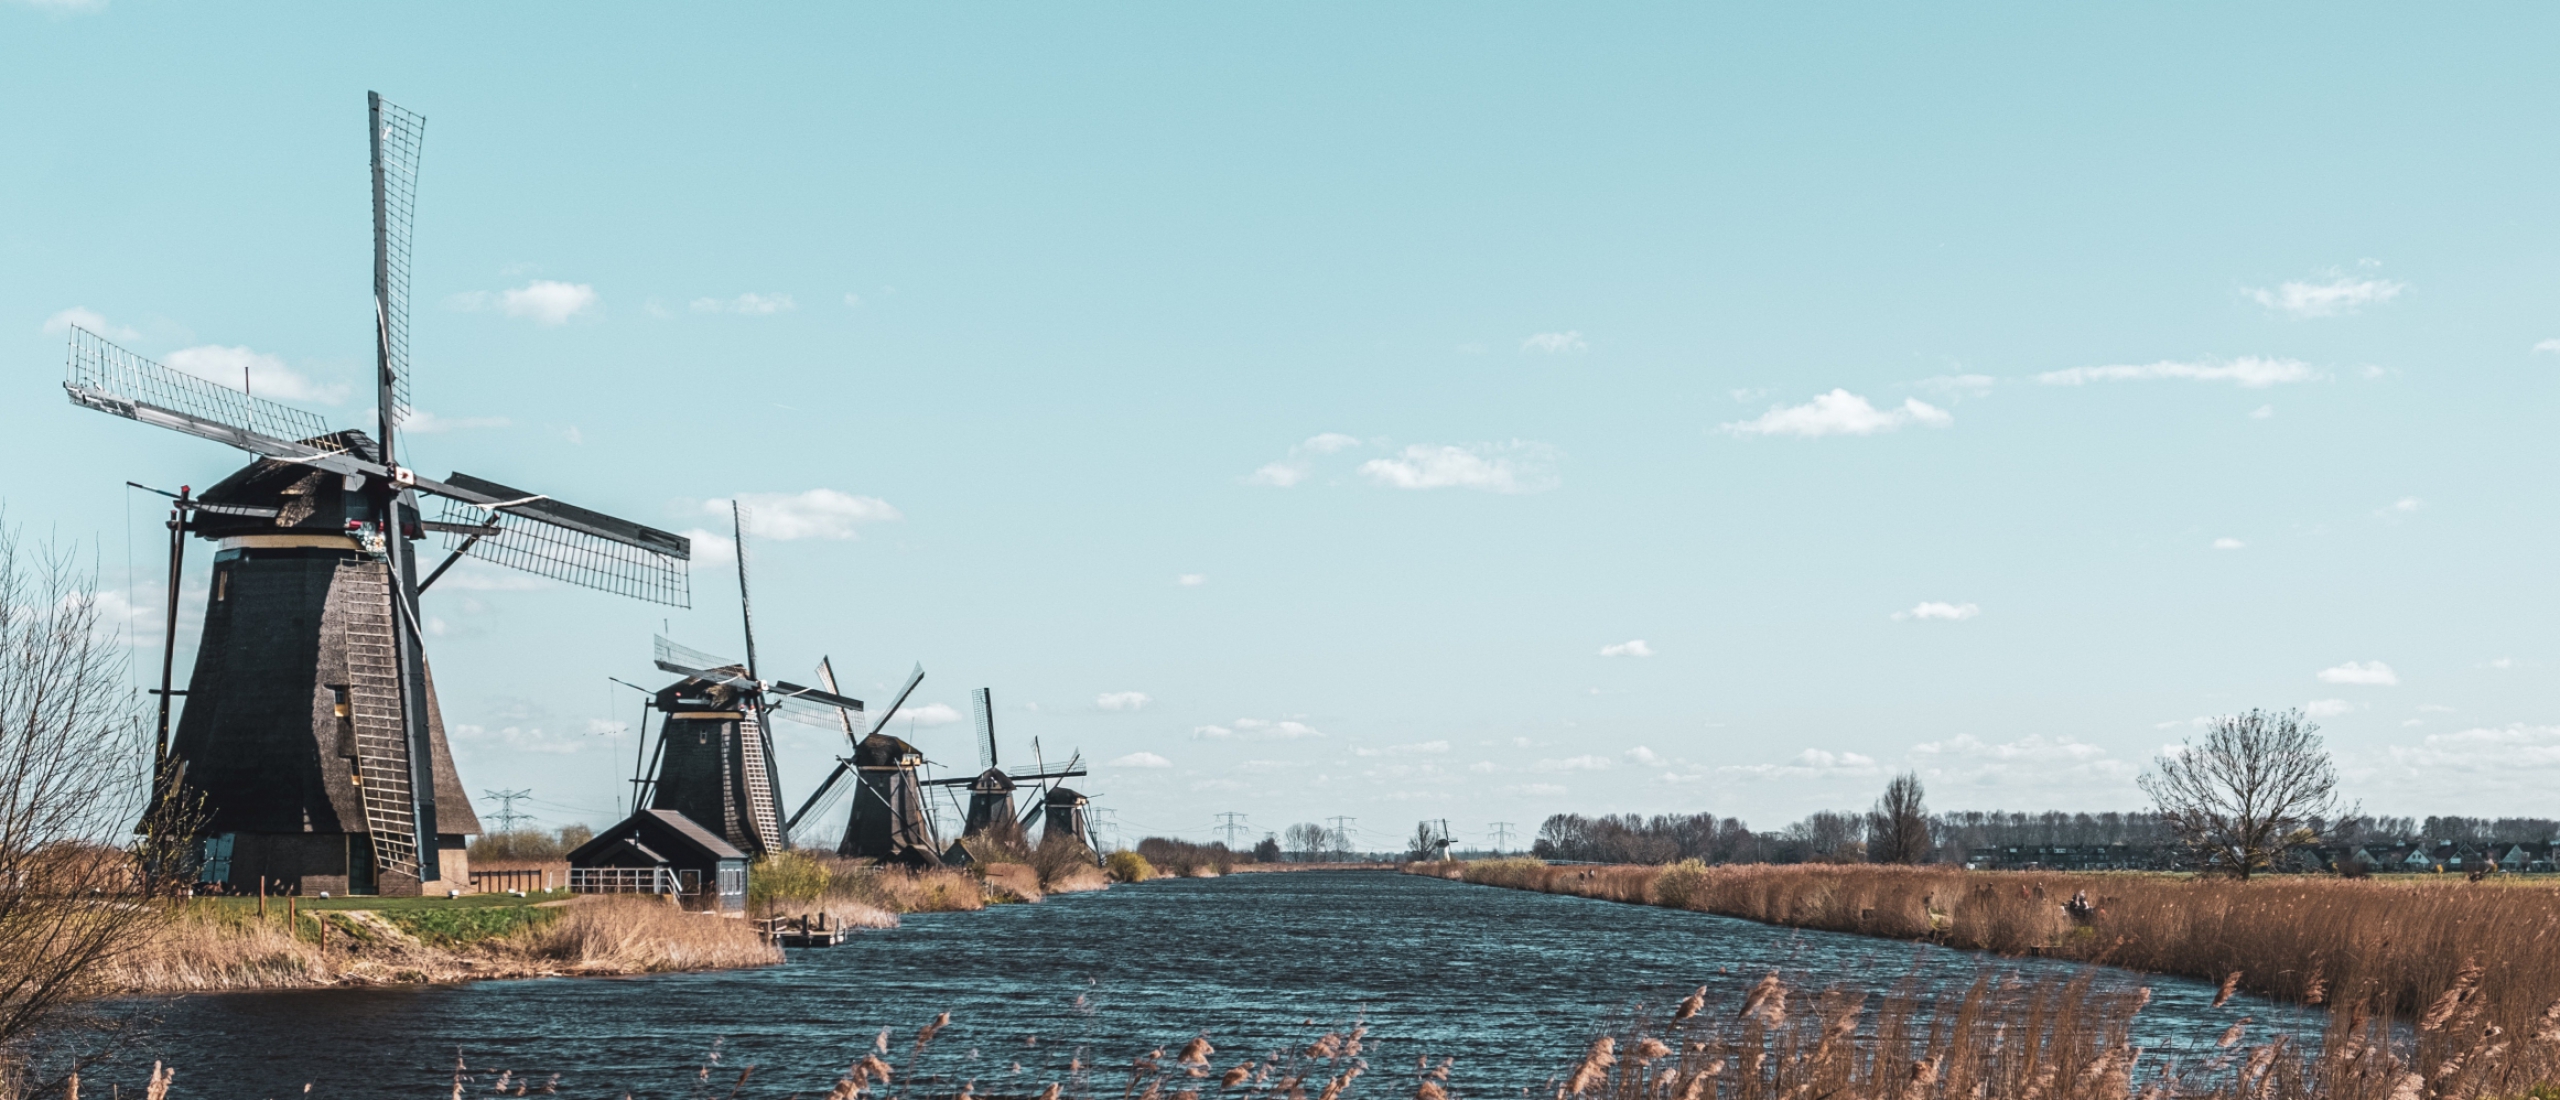 SUSTAINABLE GROWTH OF THE KINDERDIJK WORLD HERITAGE SITE 